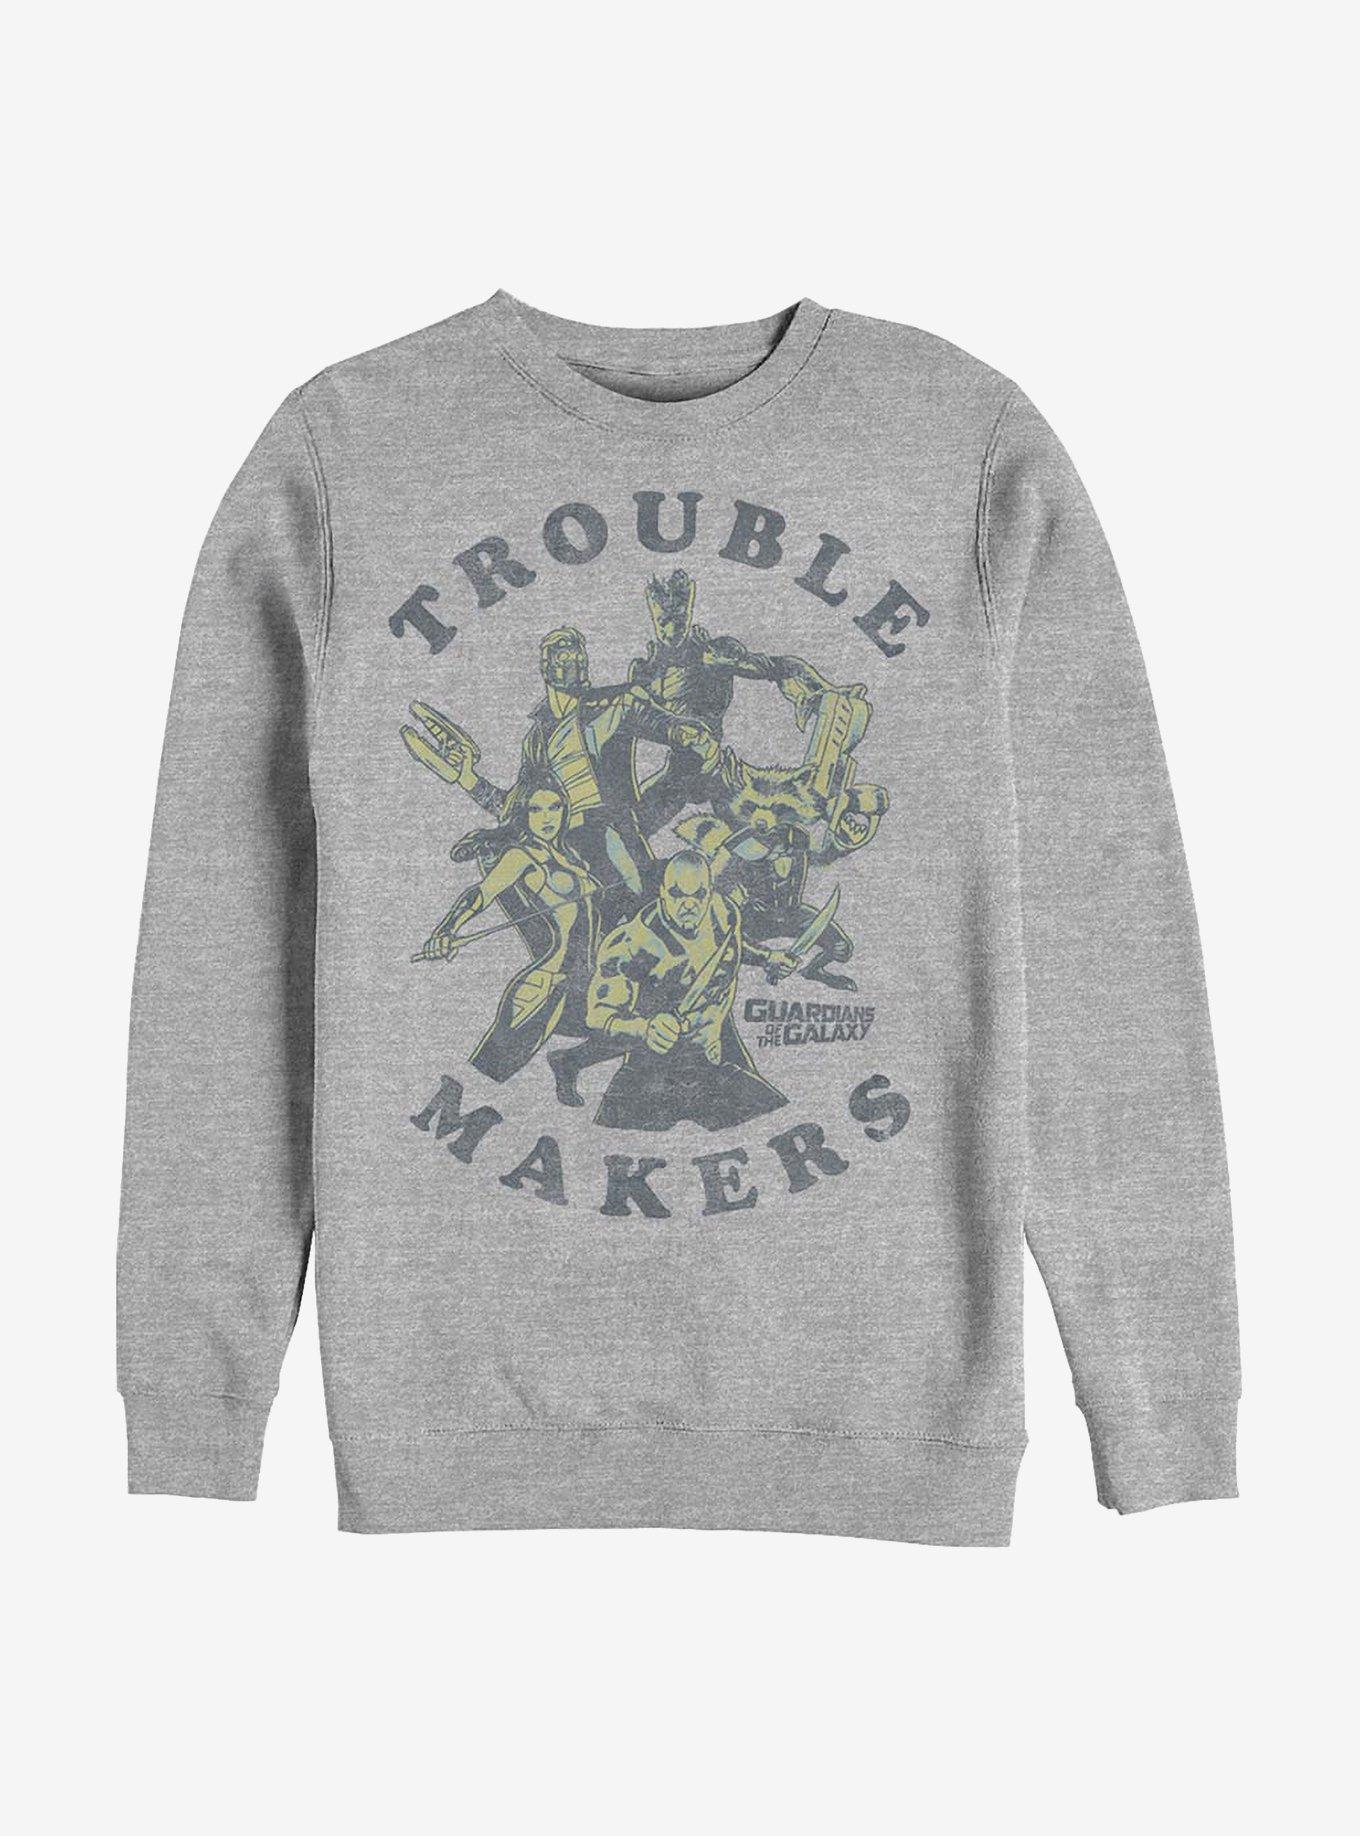 Marvel Guardians Of The Galaxy Trouble Makers Crew Sweatshirt, ATH HTR, hi-res